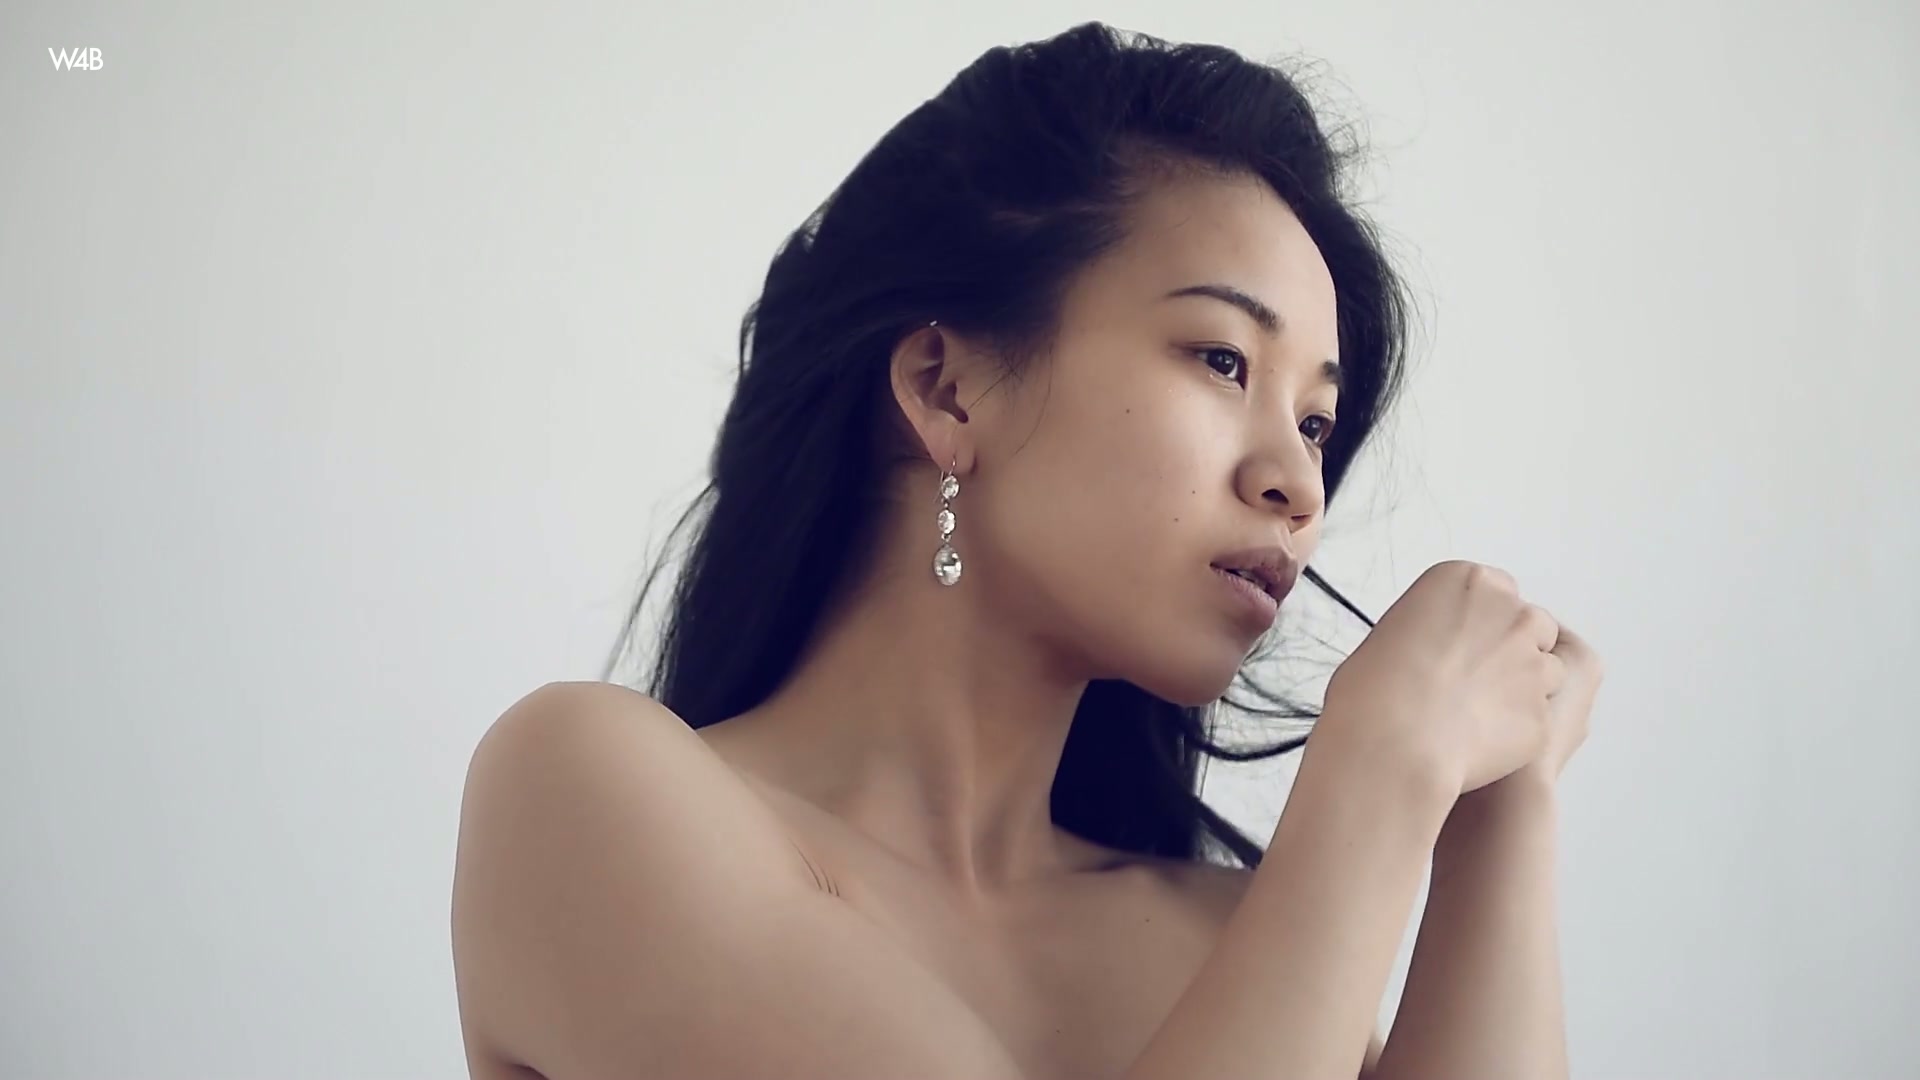 1920px x 1080px - Quite hardening solo nude show performed by lovely Asian nympho Emma